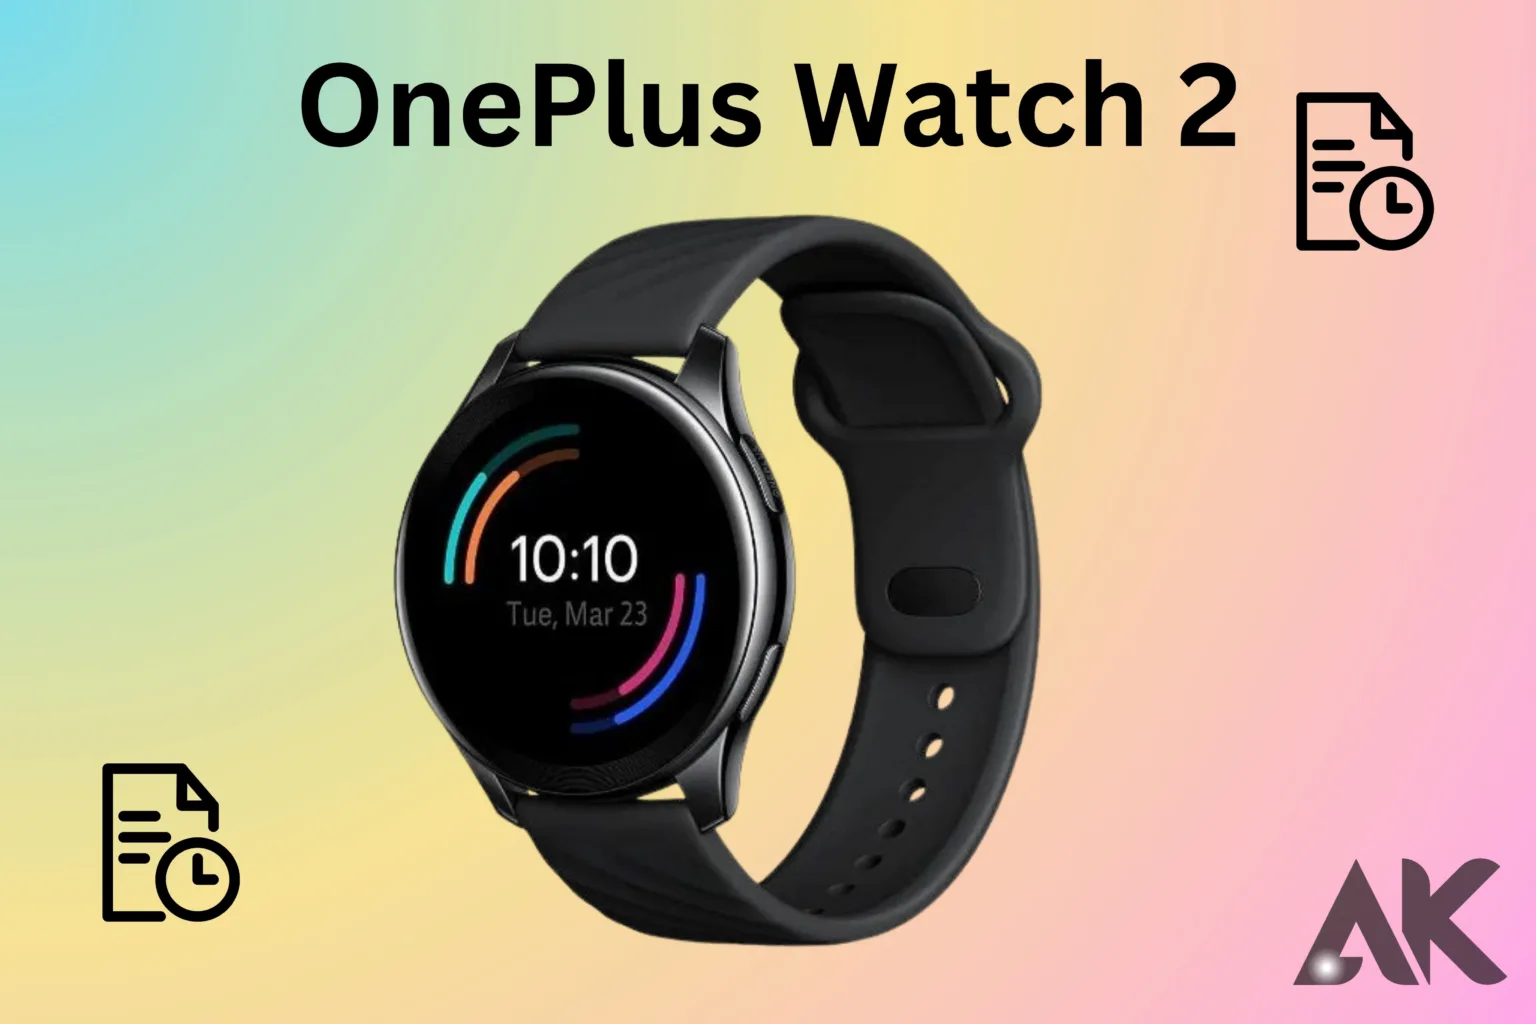 OnePlus Watch 2 fitness tracking